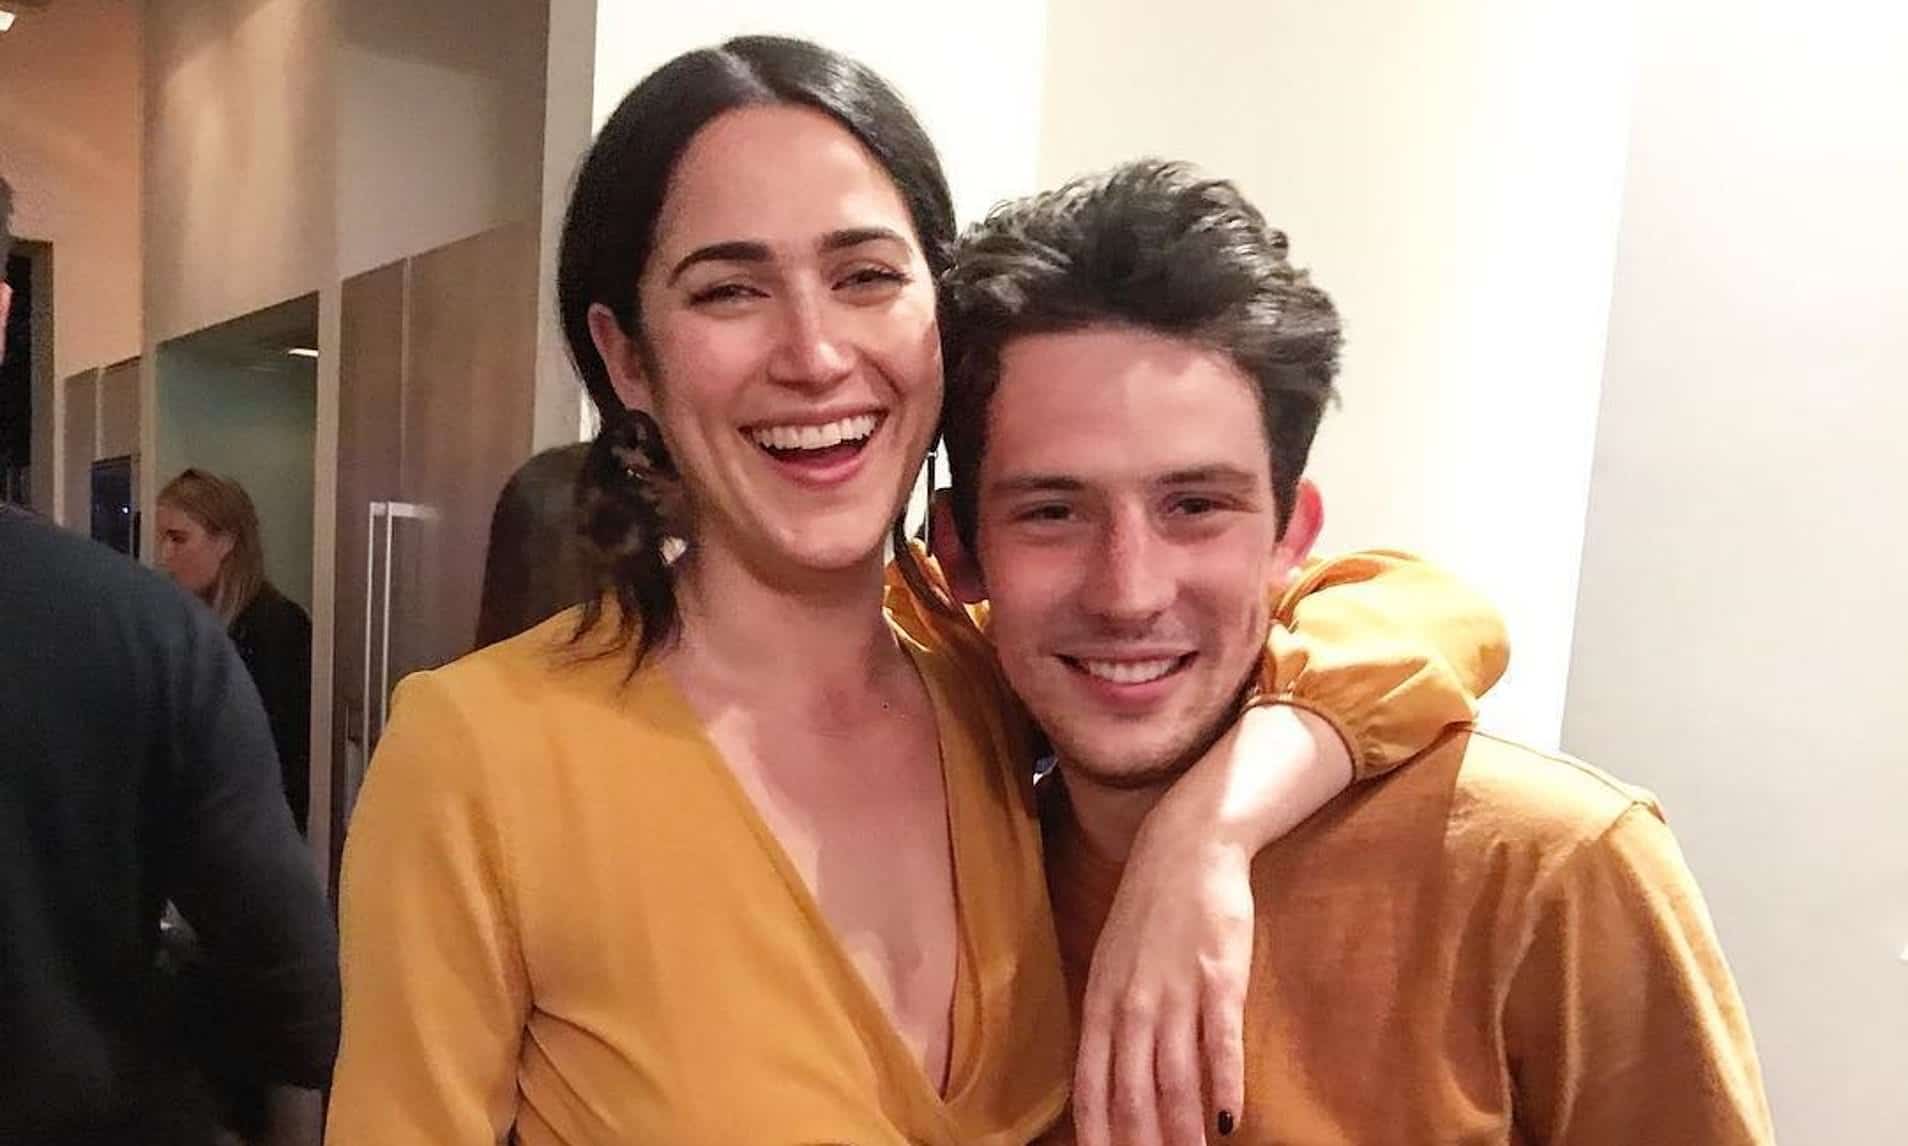 Image of Josh O’Connor with his girlfriend, Margot Hauer-King